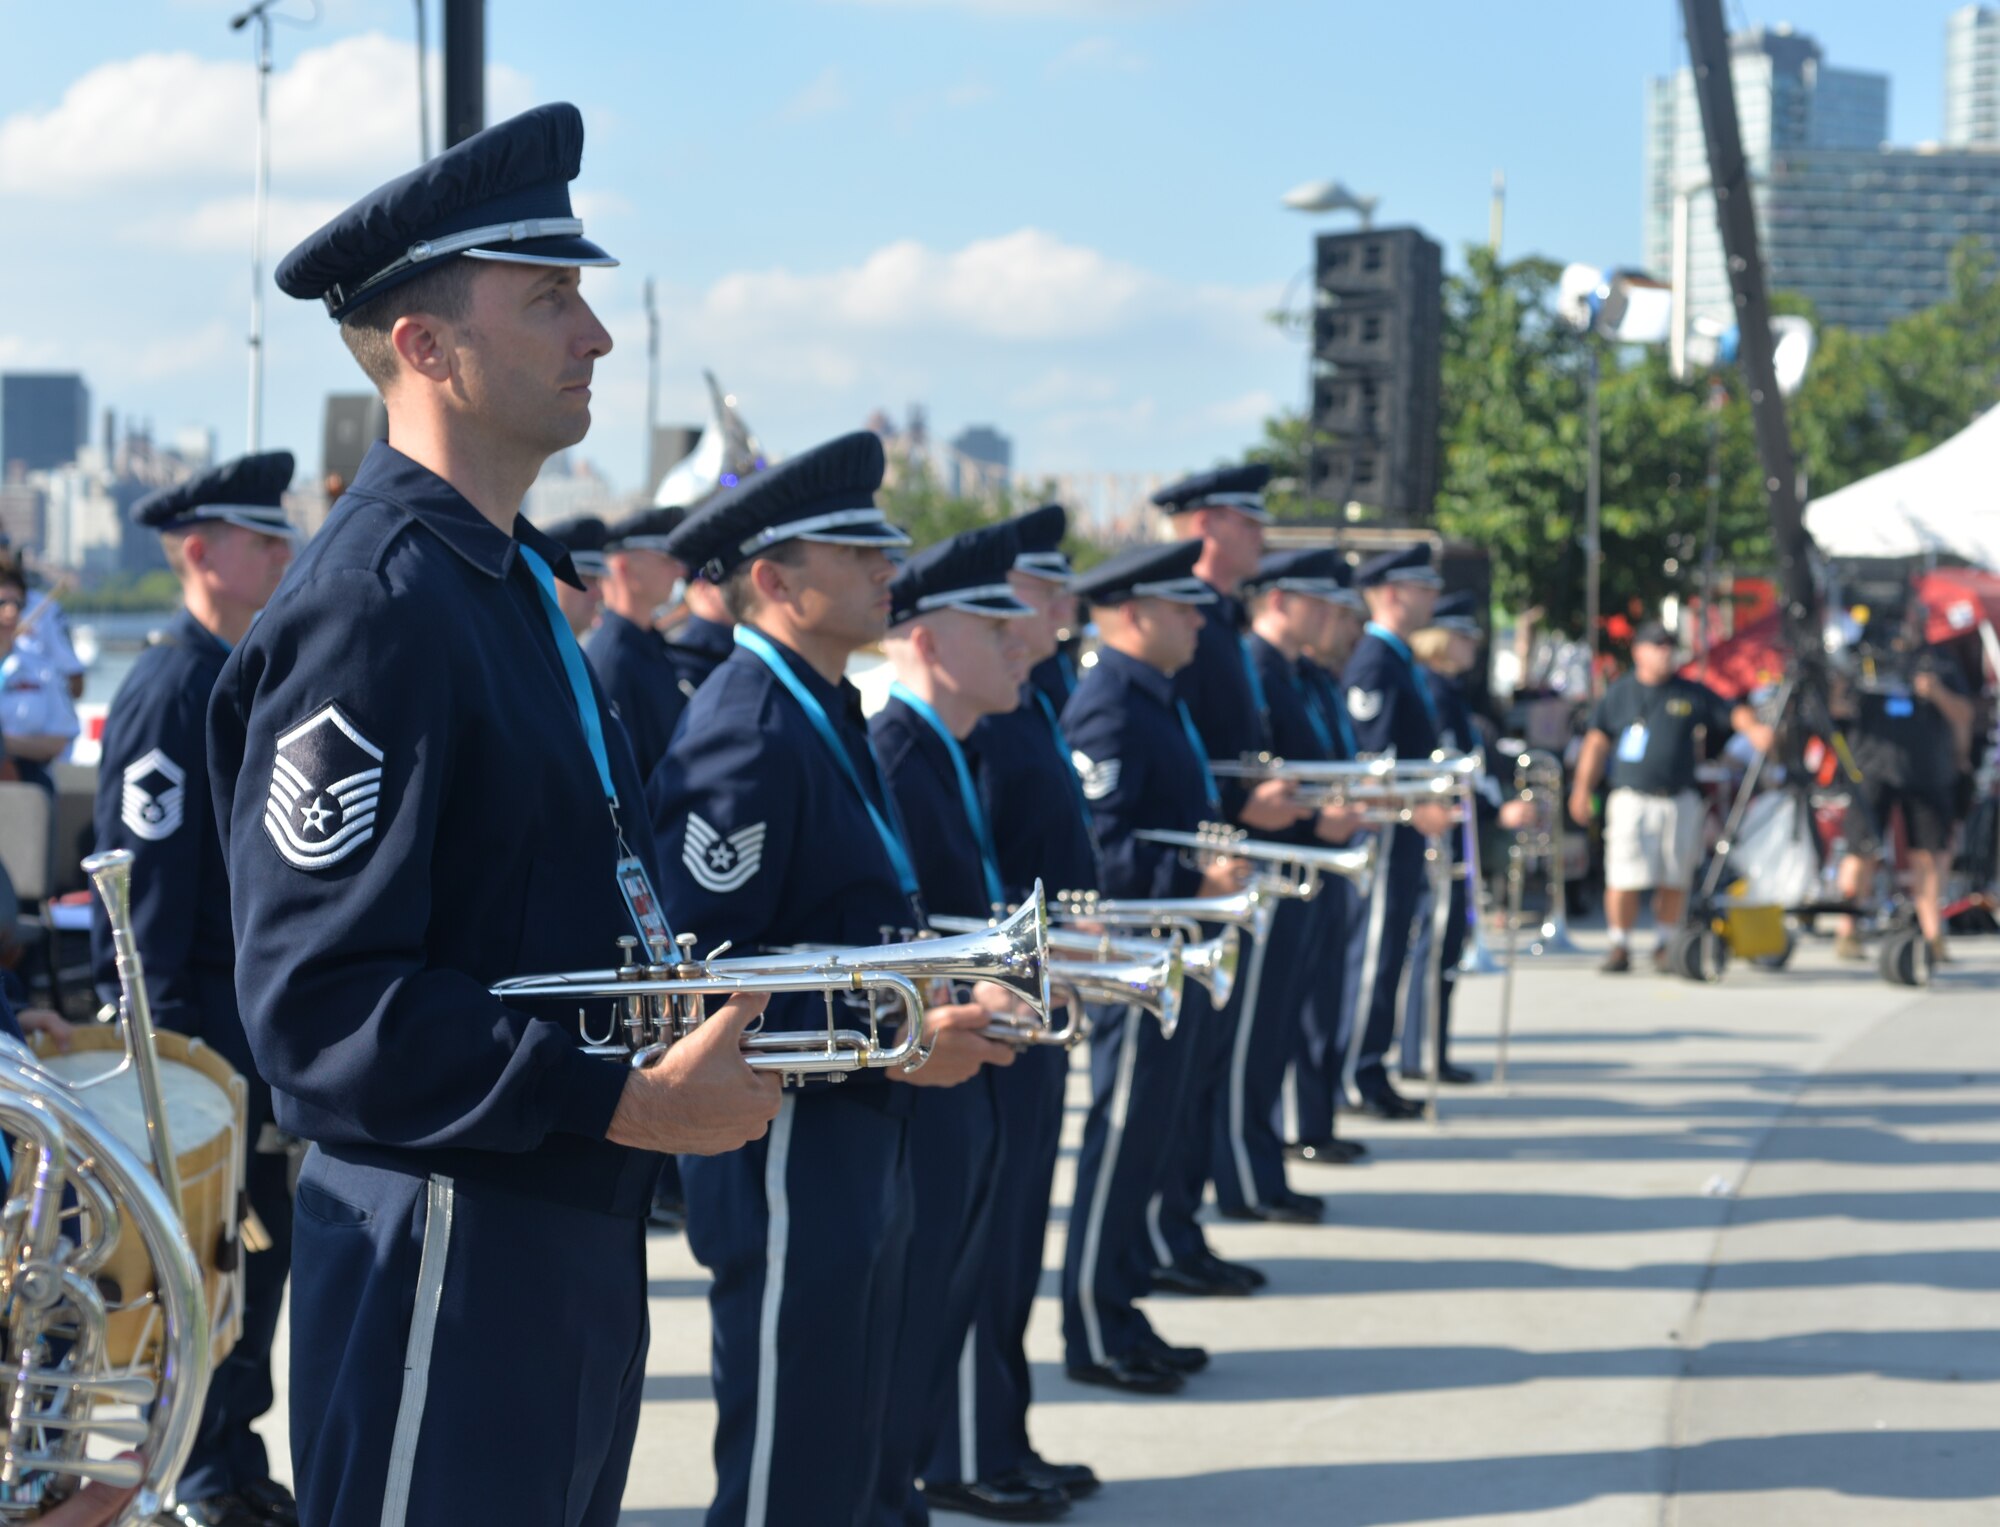 The Ceremonial Brass line up for their first number of their performance at the Macy’s Fireworks Show on July 4, 2015. This performance was part of a larger five-day tour in New York City to represent the Air Force on the nation's birthday (U.S. Air Force photo/1Lt. Esther Willett).